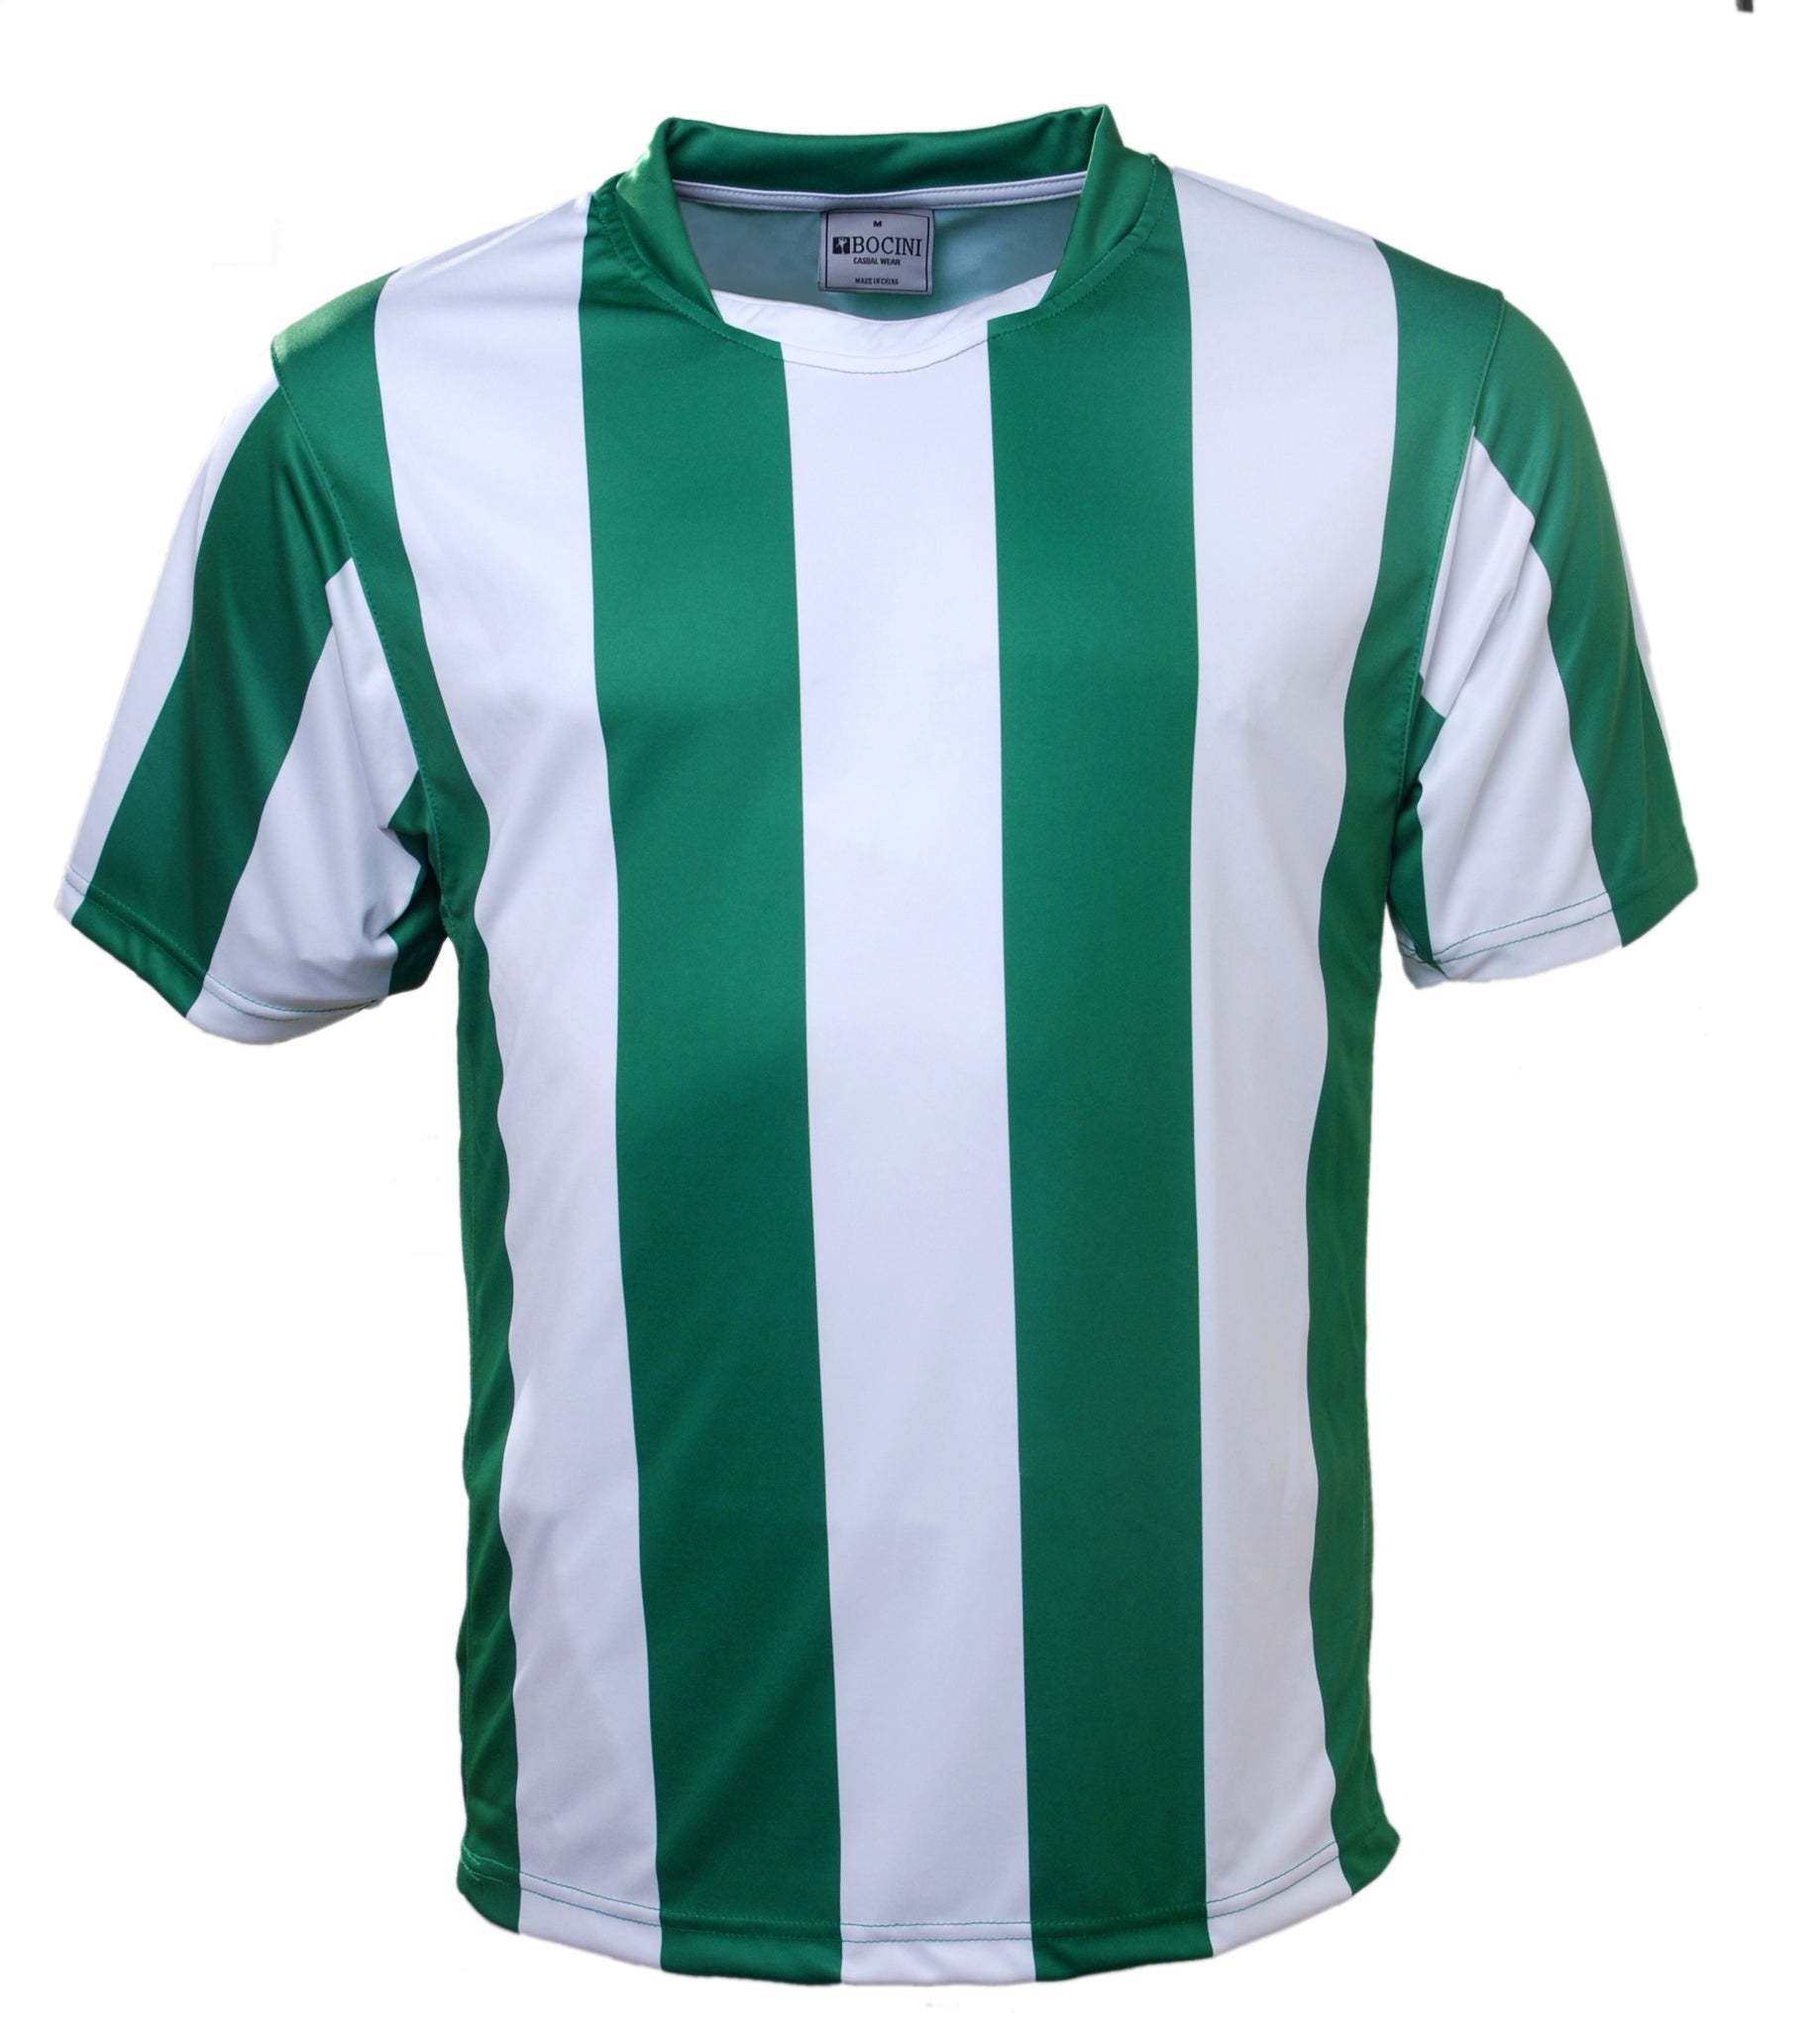 STRIPED FOOTBALL JERSEY ADULT GREEN/WHITE